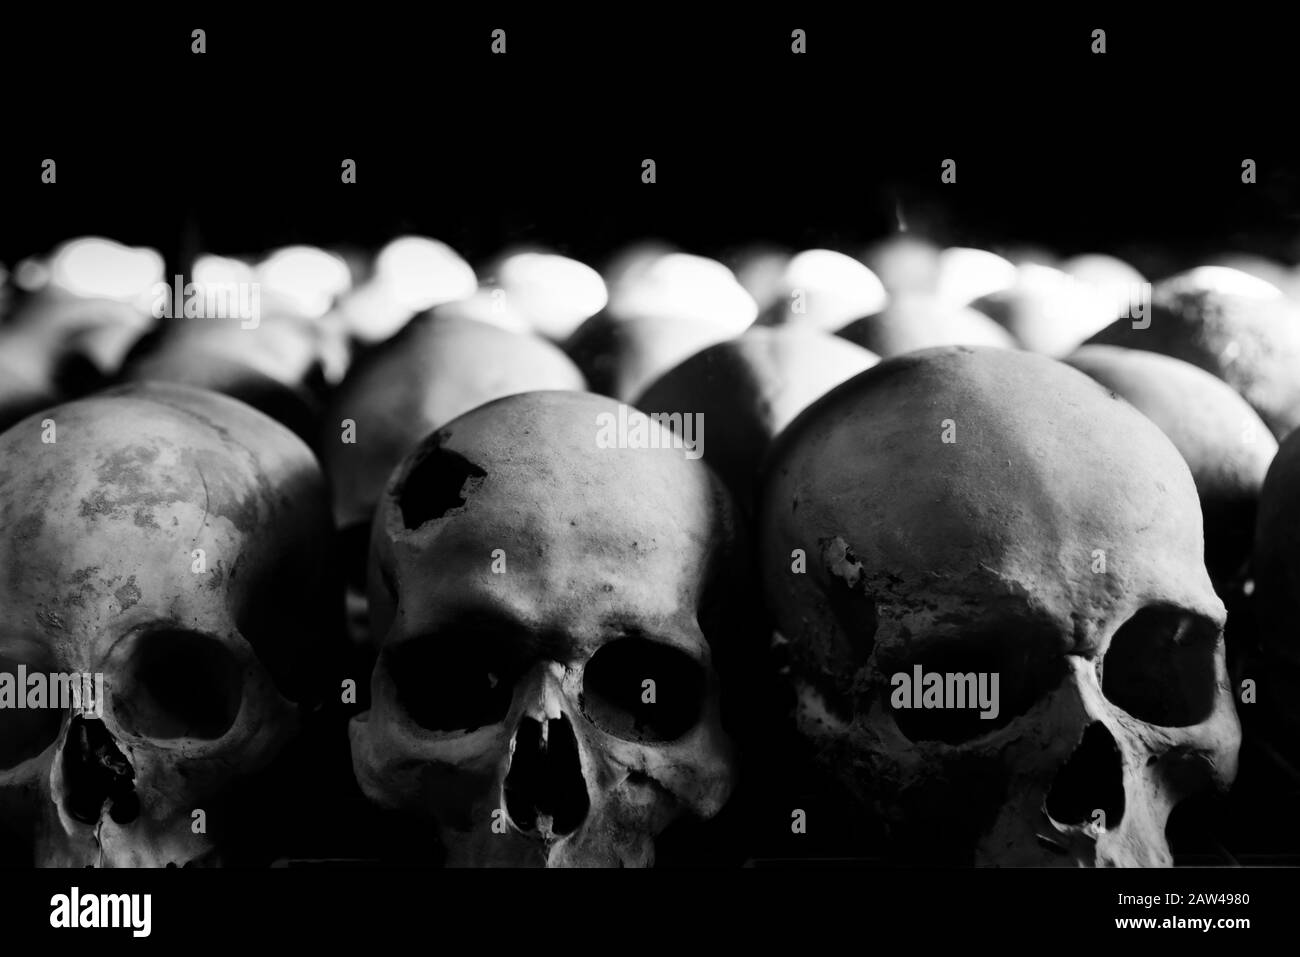 group of human skulls in the foreground on a black background Stock Photo